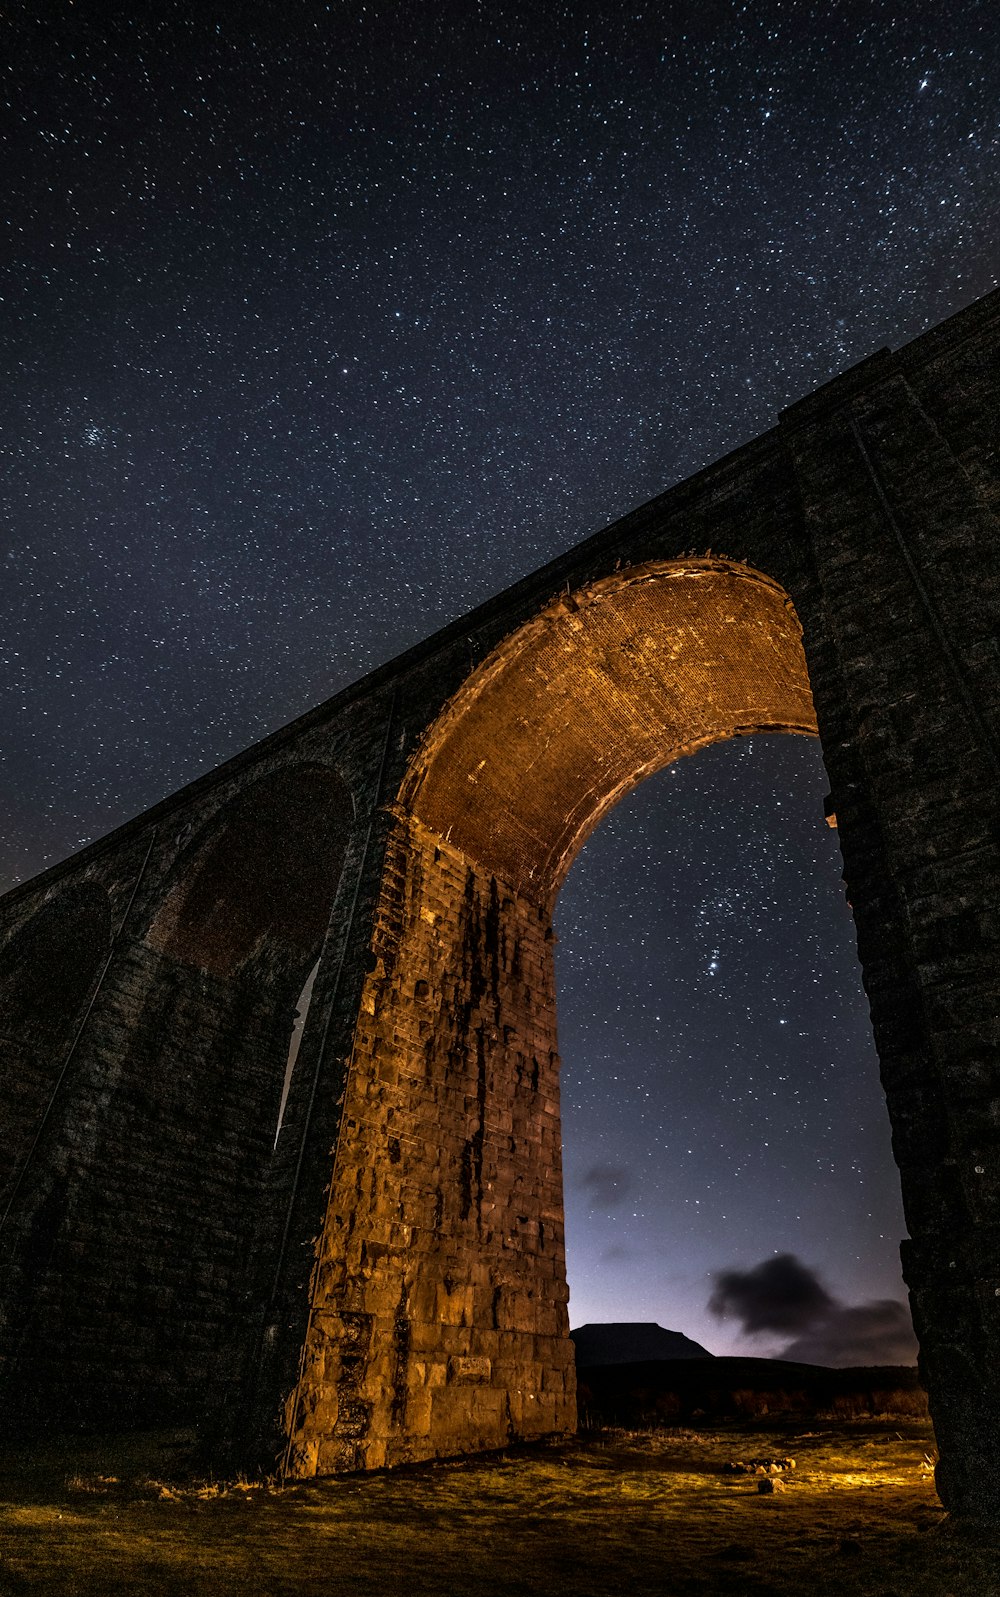 a stone bridge with a sky full of stars in the background